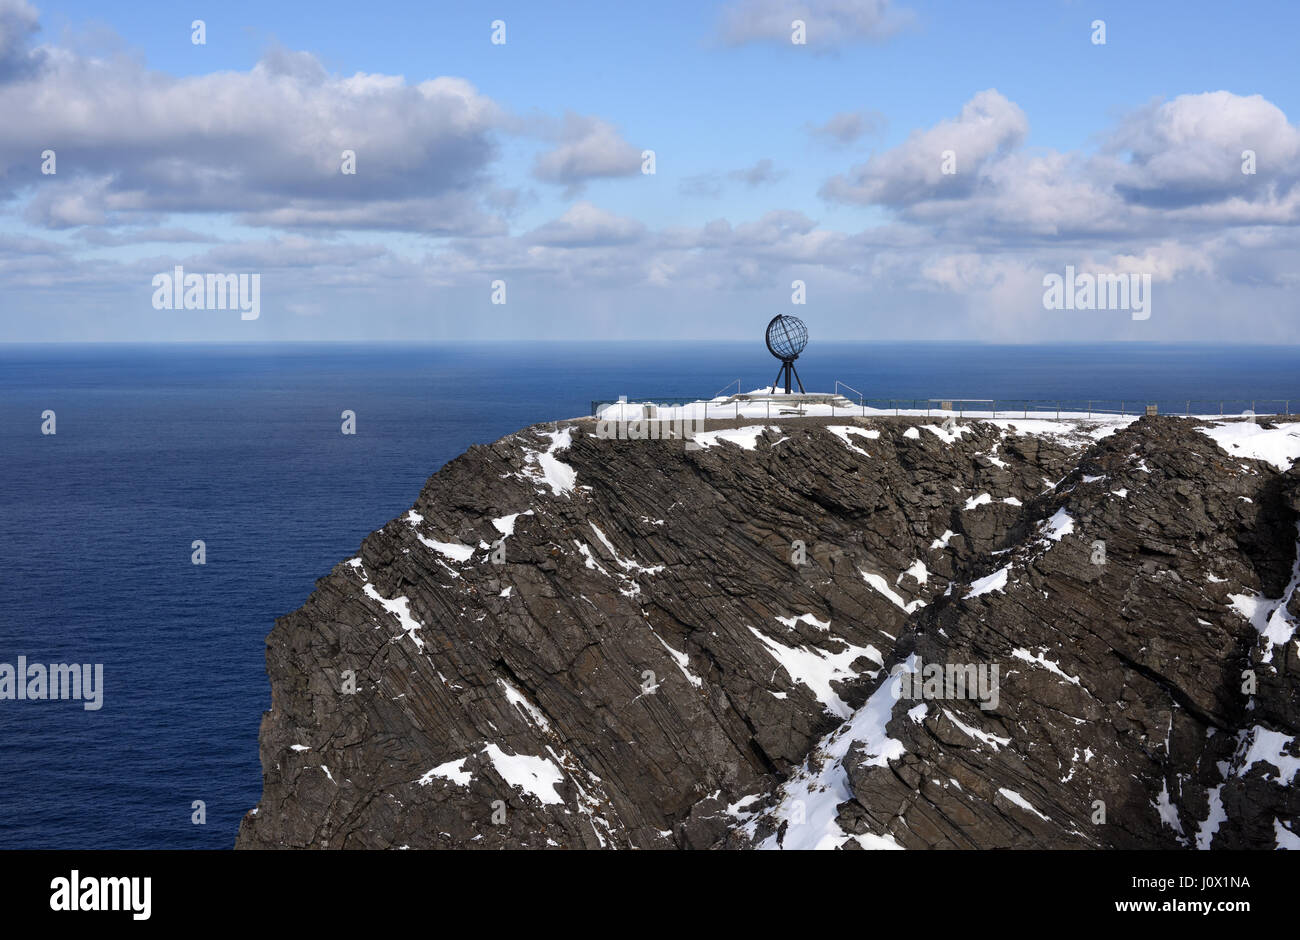 The globe monument on North Cape, Nordkapp. The monument overlooks the Barents Sea. Nordkapp, Finmark, Norway. Stock Photo